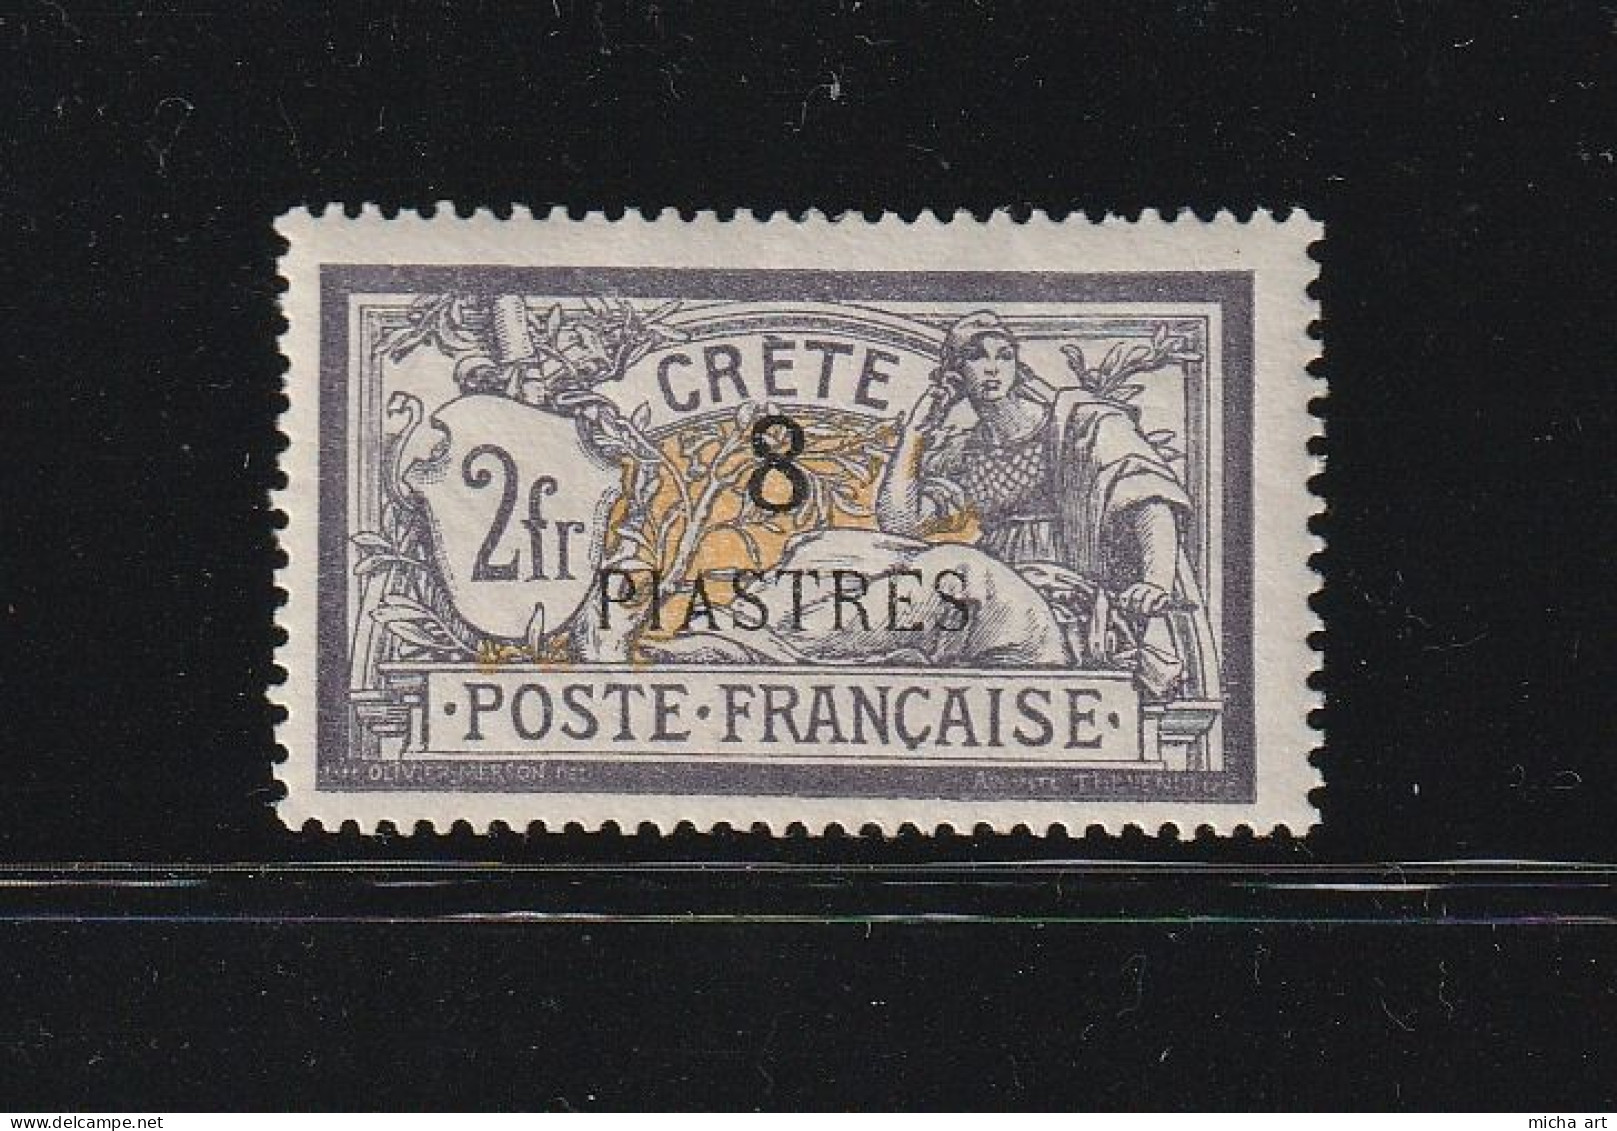 Greece Crete French Post Office 1903 Surcharged Crete Issue 8 Pi / 2 Fr. MH W1097 - Neufs